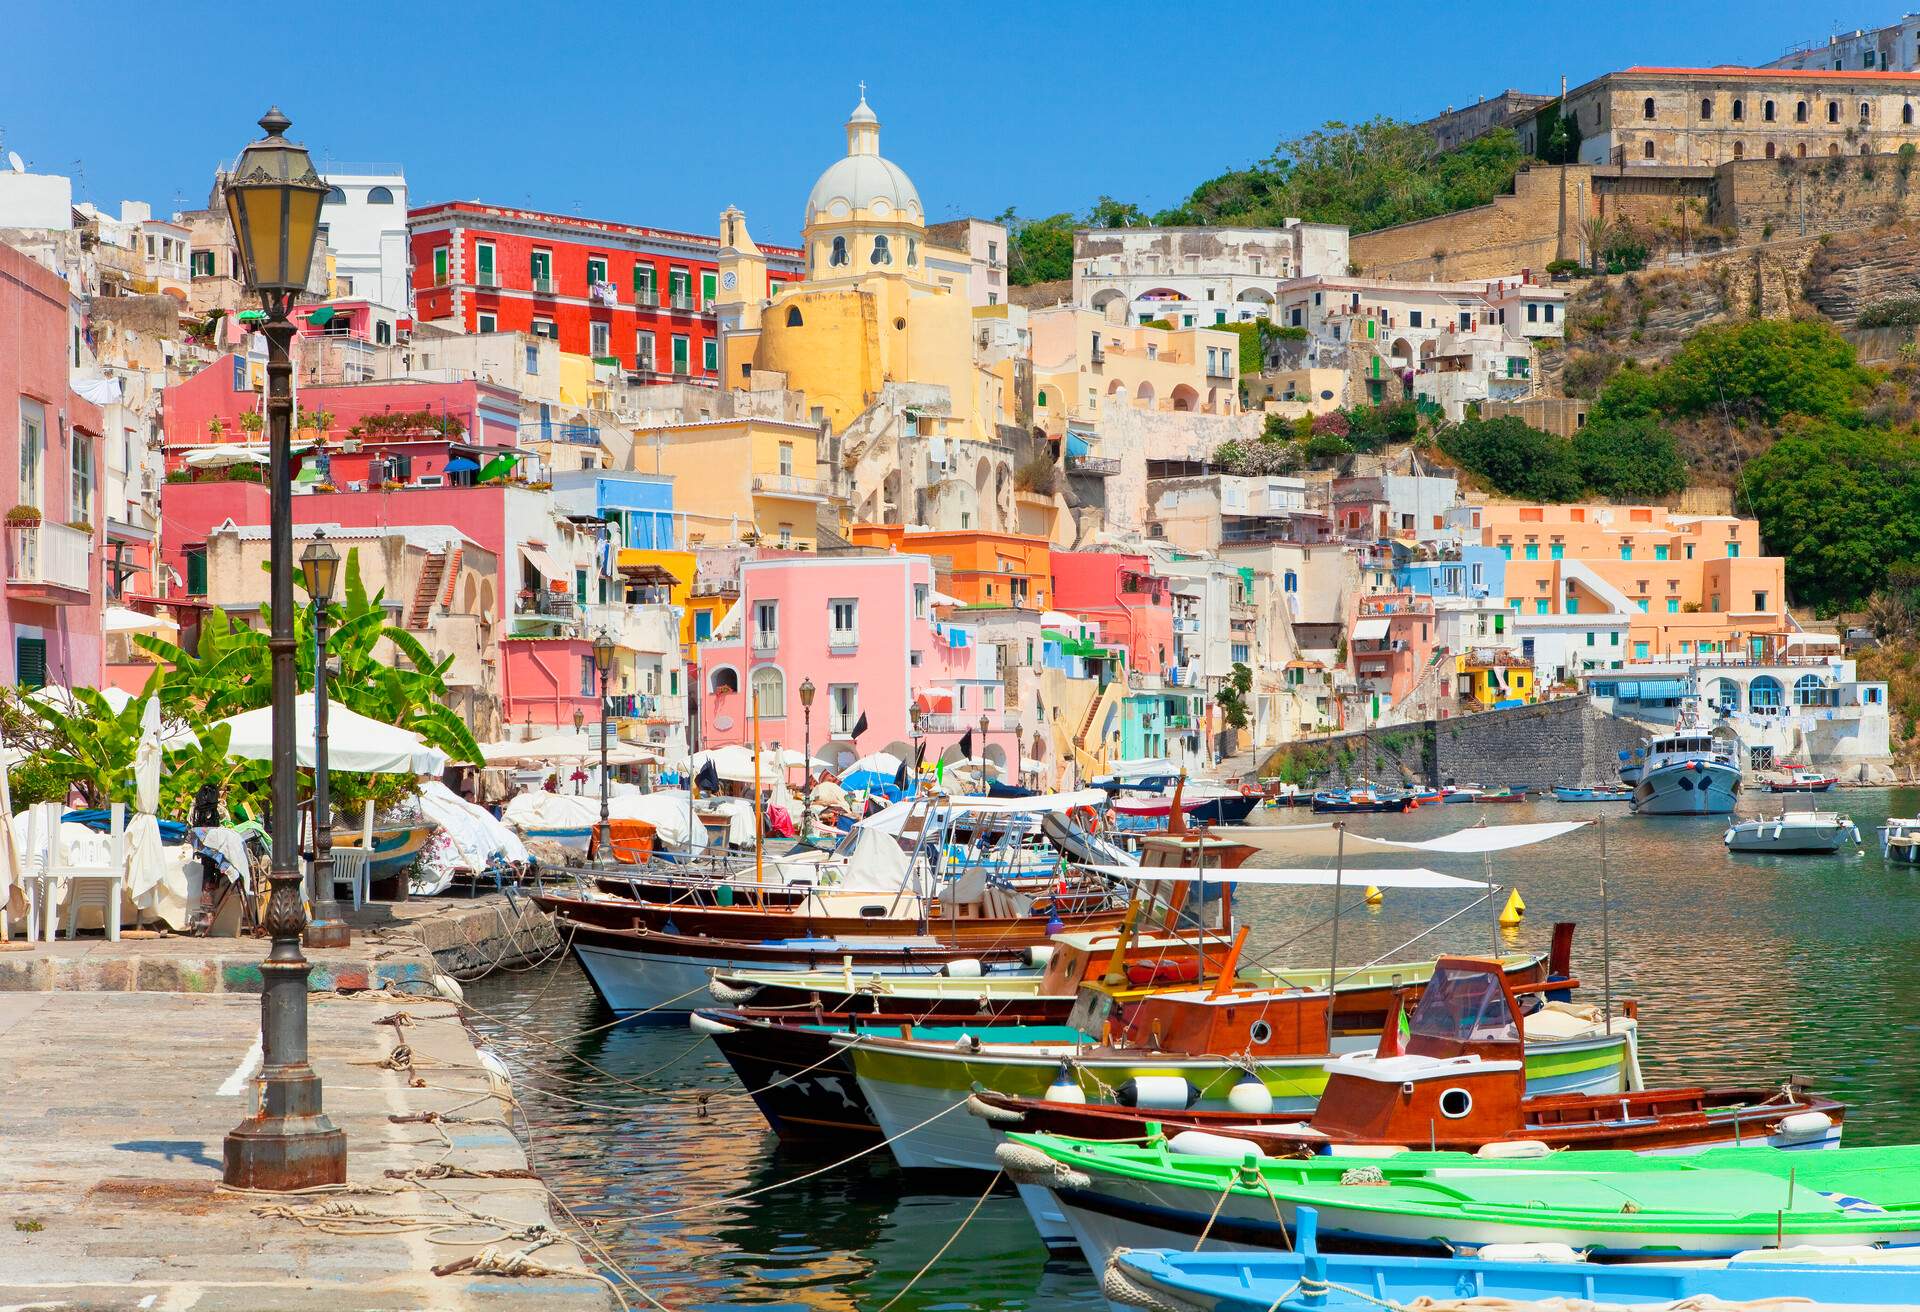 DEST_ITALY_NAPLES_PROCIDA_GettyImages-185500165.jpg